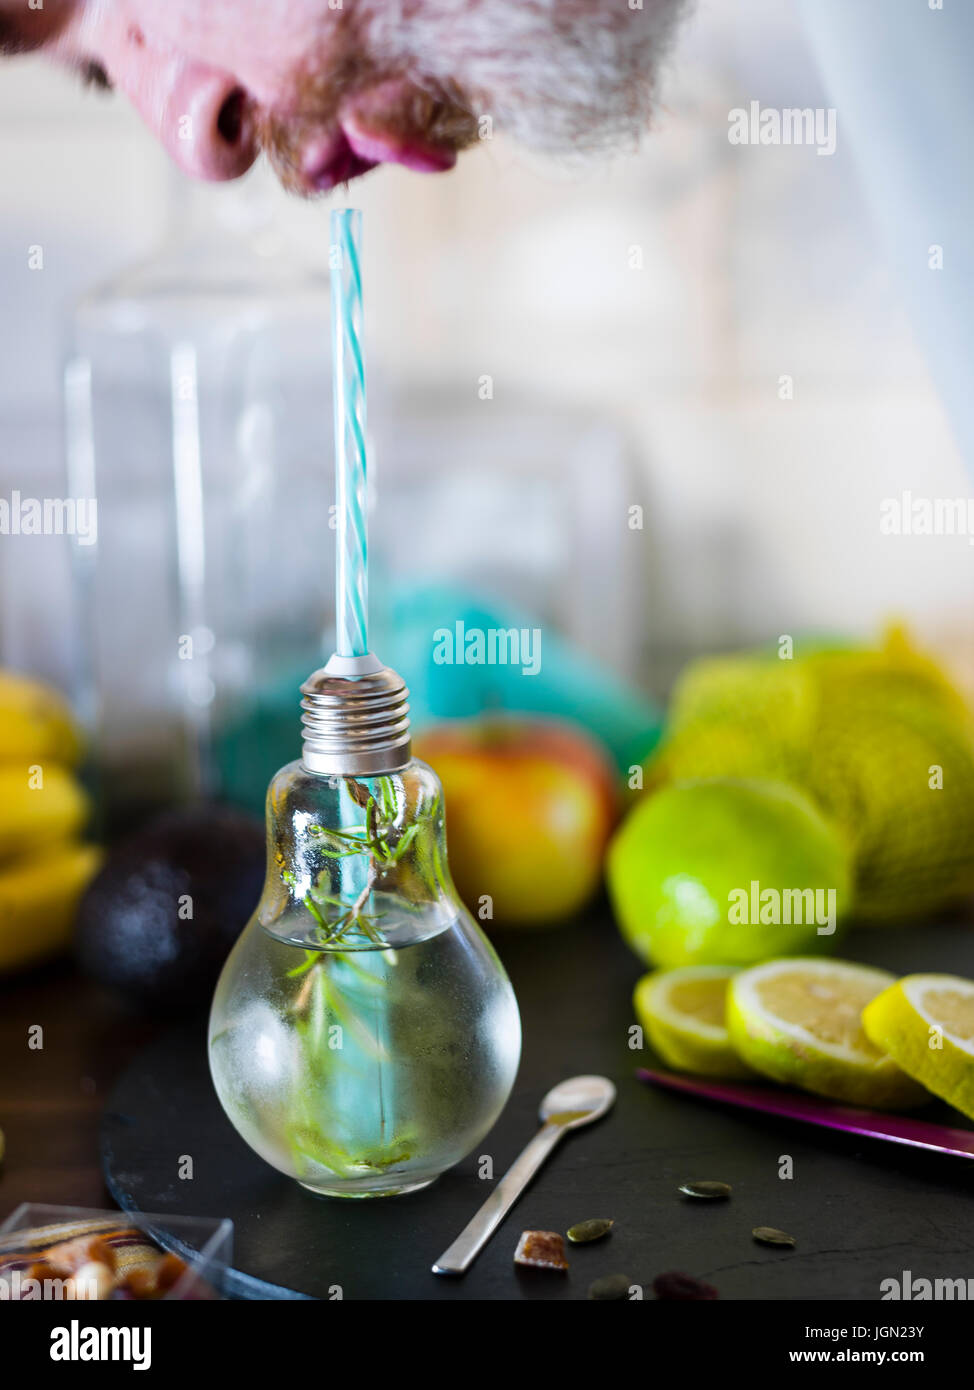 Small design  jar with straw filled with infused water of lemon, straw. Fresh, summer mood. Stock Photo